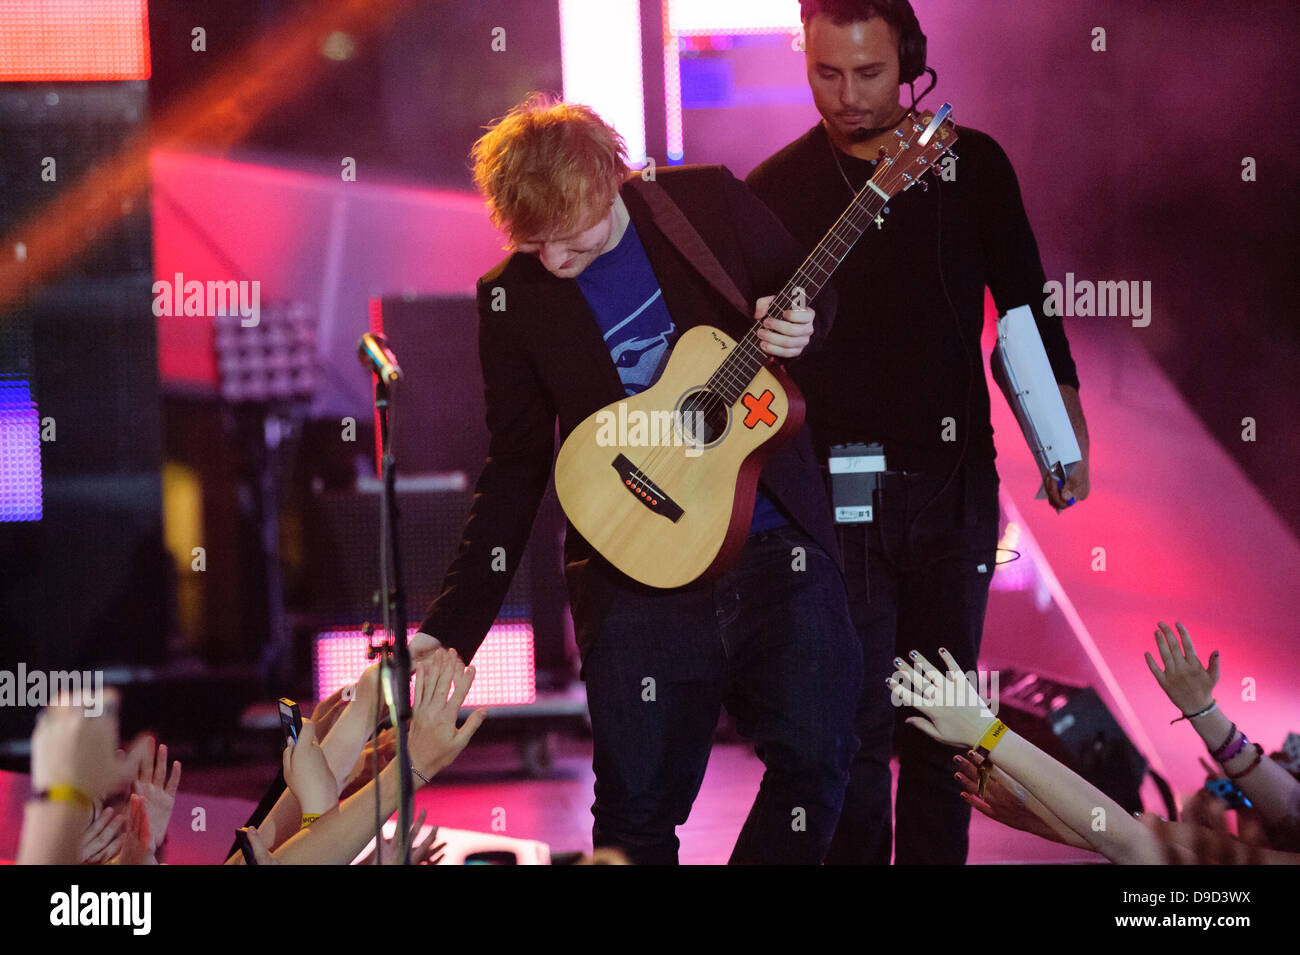 Tornoto, Canada. 16th Jun 2013. Ed Sheeran performs at the 2013 MMVA in Toronto Canada. The MuchMusic Video Awards took over the trendy Queen West village in Toronto for an award show featuring PSY and other super stars including Avril Lavigne, Demi Lovato, Serena Ryder, Ed Sheeran, Marianas Trench, Classified, and Armin Van Buuren with Trevor Guthrie. Credit:  Victor Biro/Alamy Live News Stock Photo